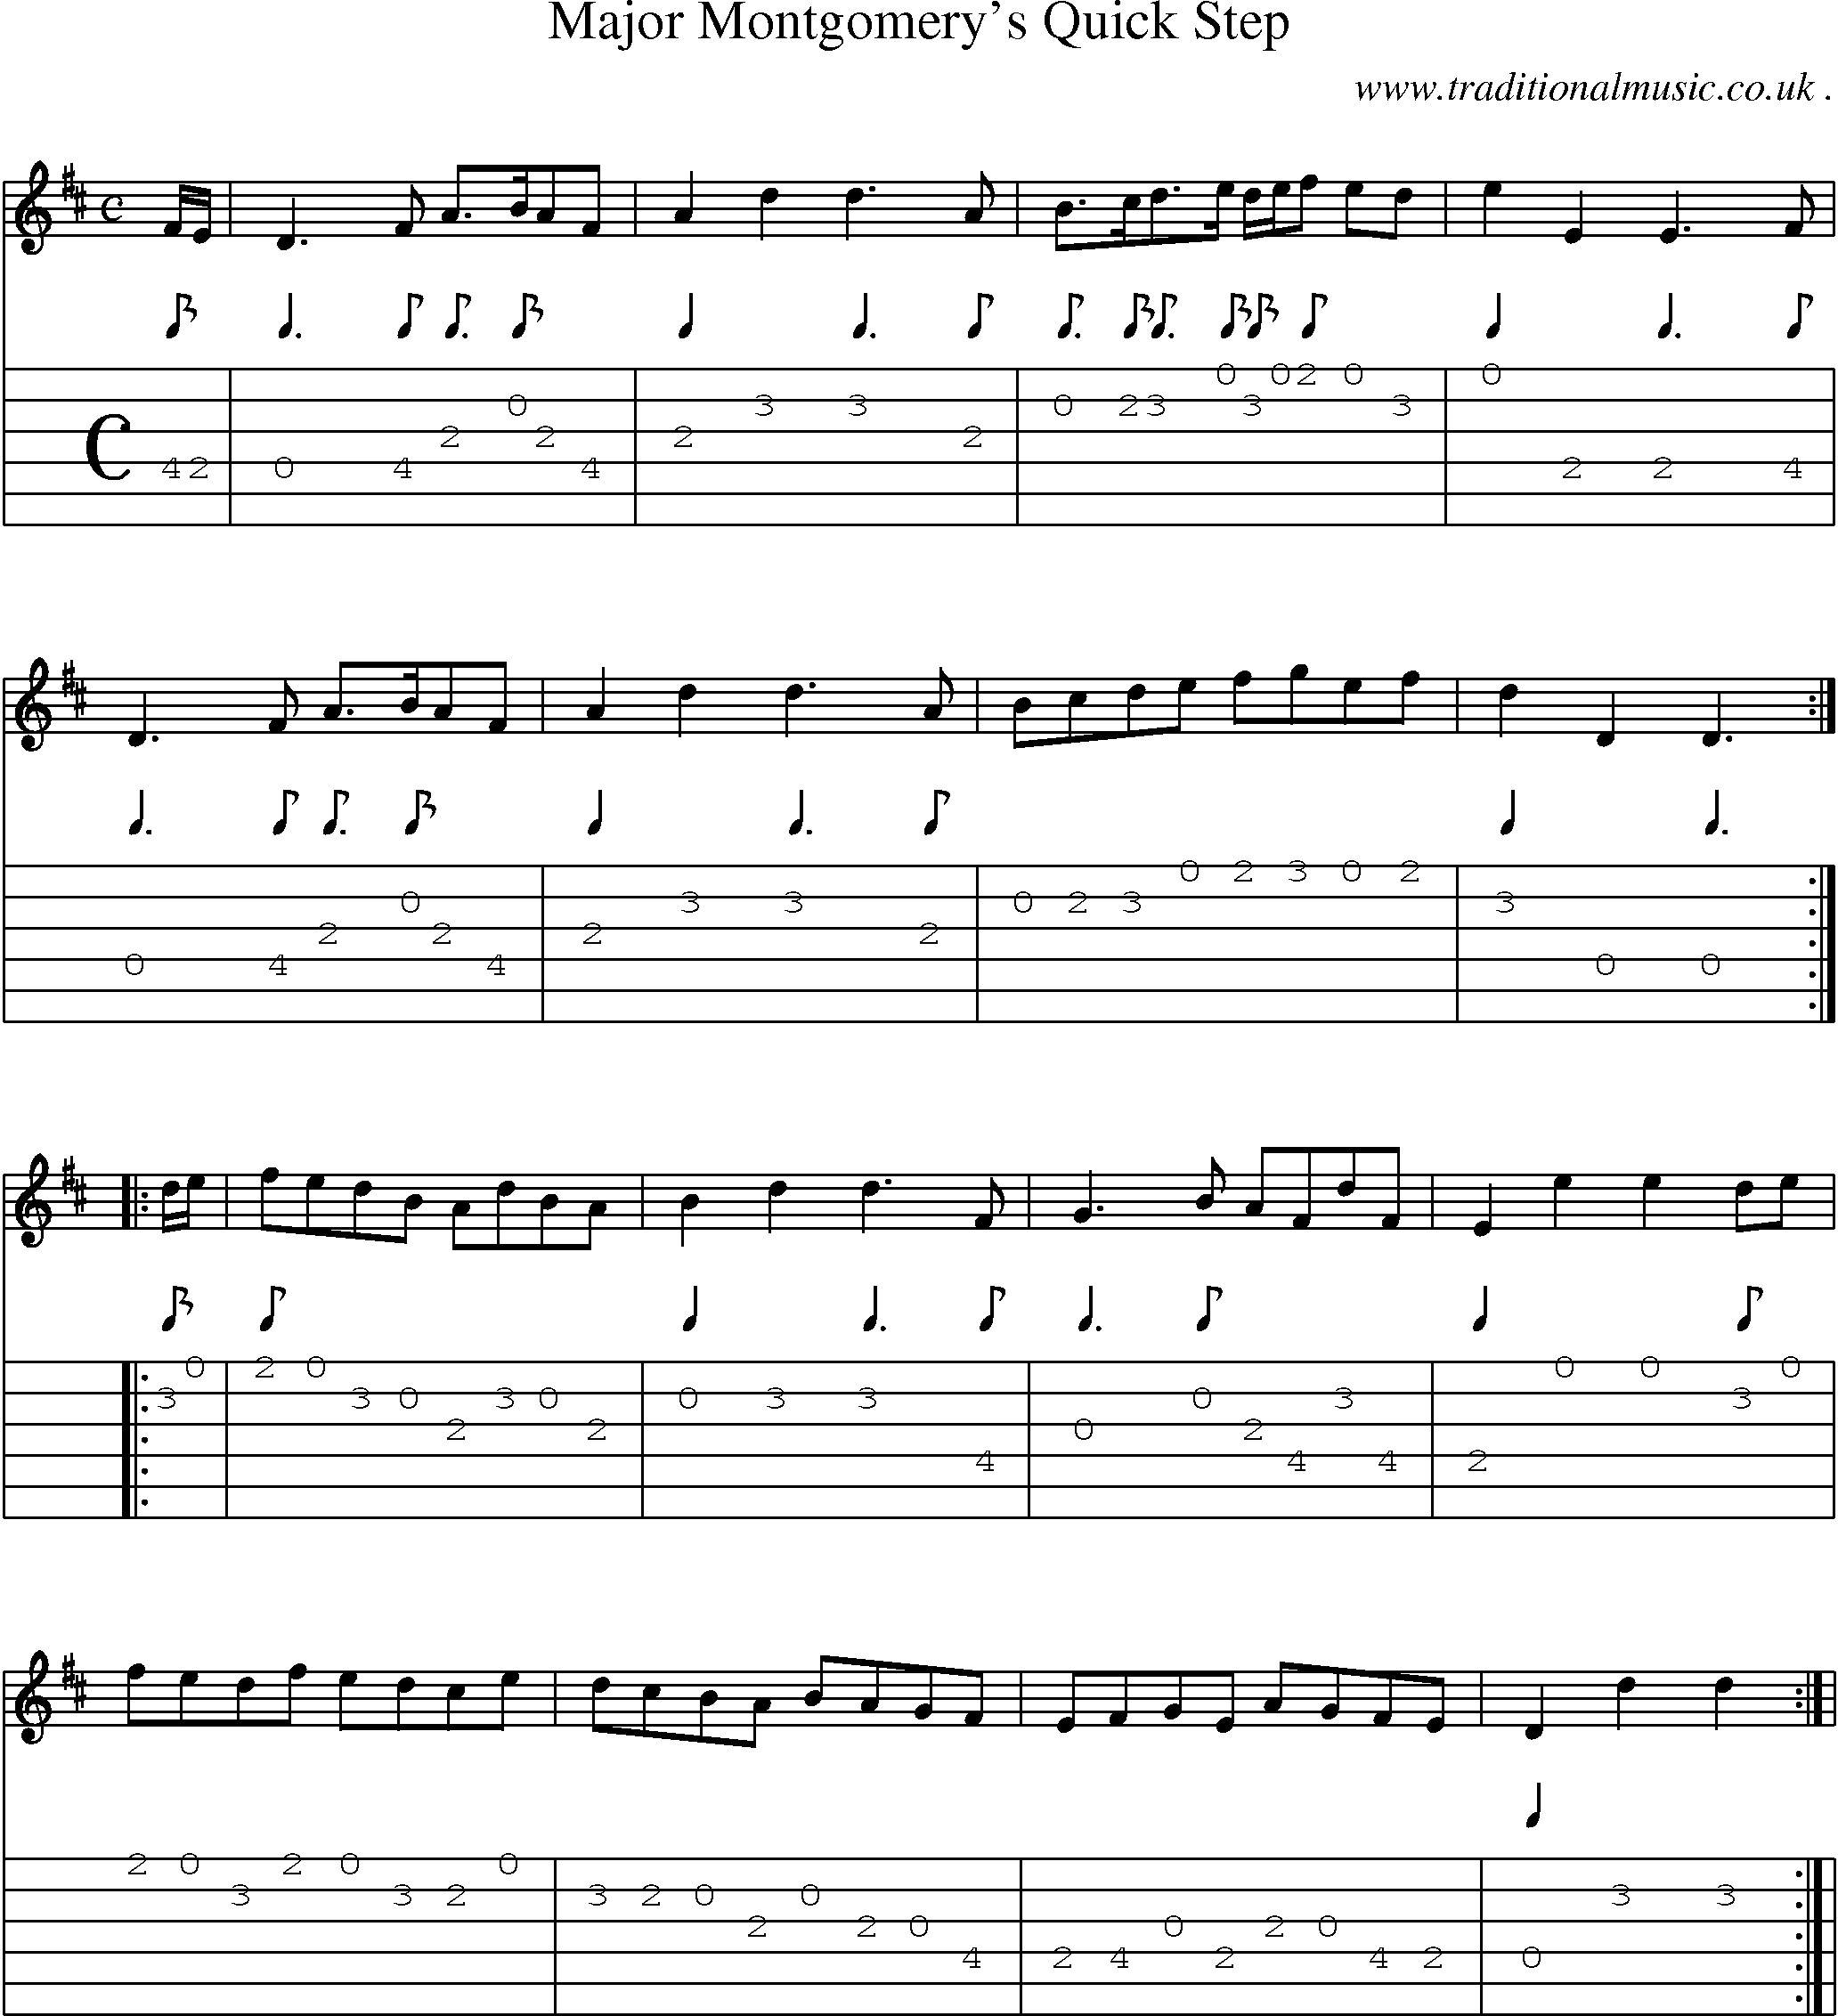 Sheet-Music and Guitar Tabs for Major Montgomerys Quick Step